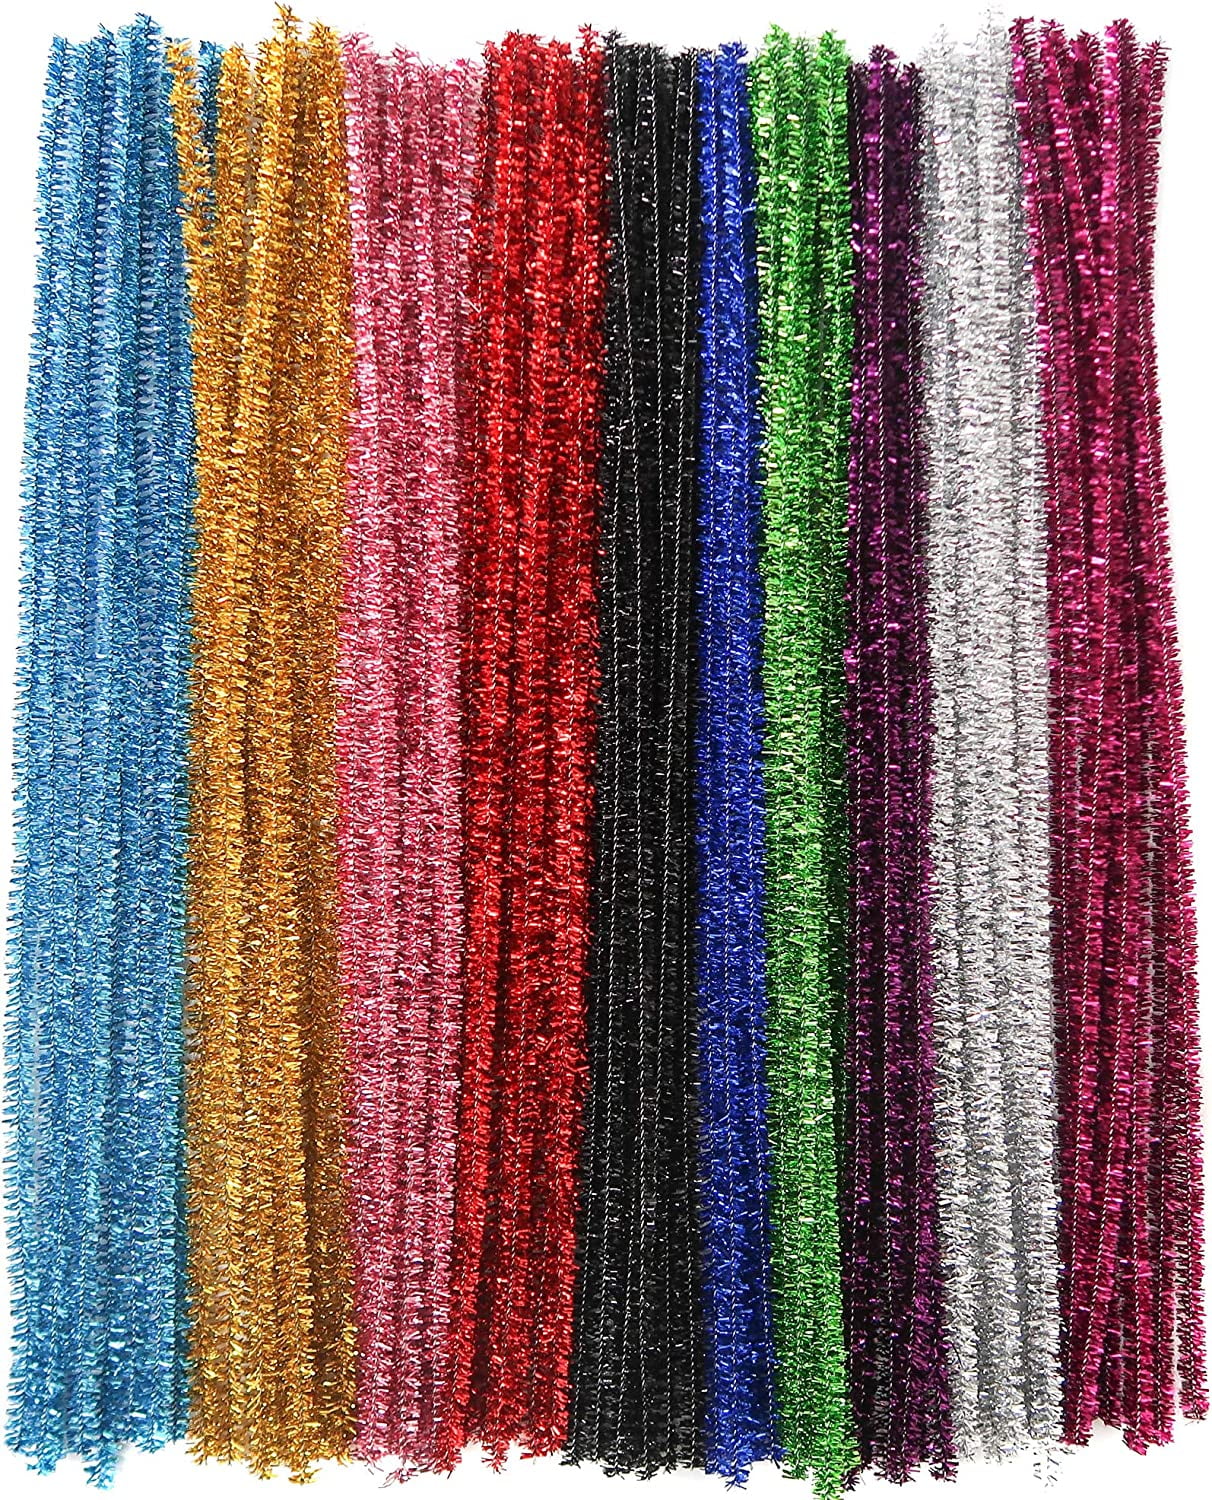 80 Pcs Pipe Cleaners Craft Chenille Stems, 6 mm x 12 Inch10 Colors Pom Poms  Craft Sticks Craft Supplies Pipecleaners for DIY Art Creative Crafts